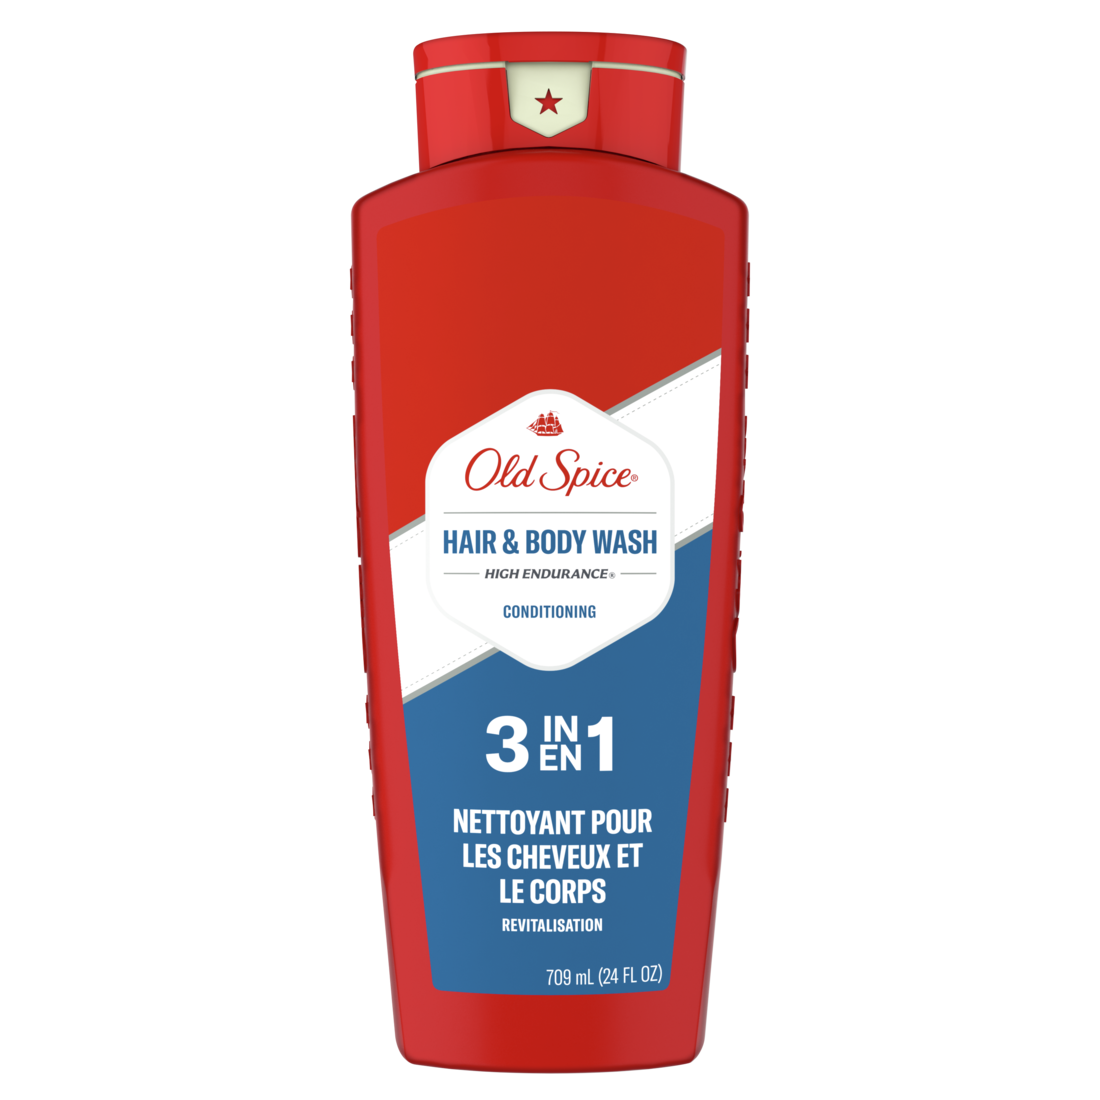 Old Spice HE Body Wash Hair&Body Conditioning - 24oz/709ml/4pk